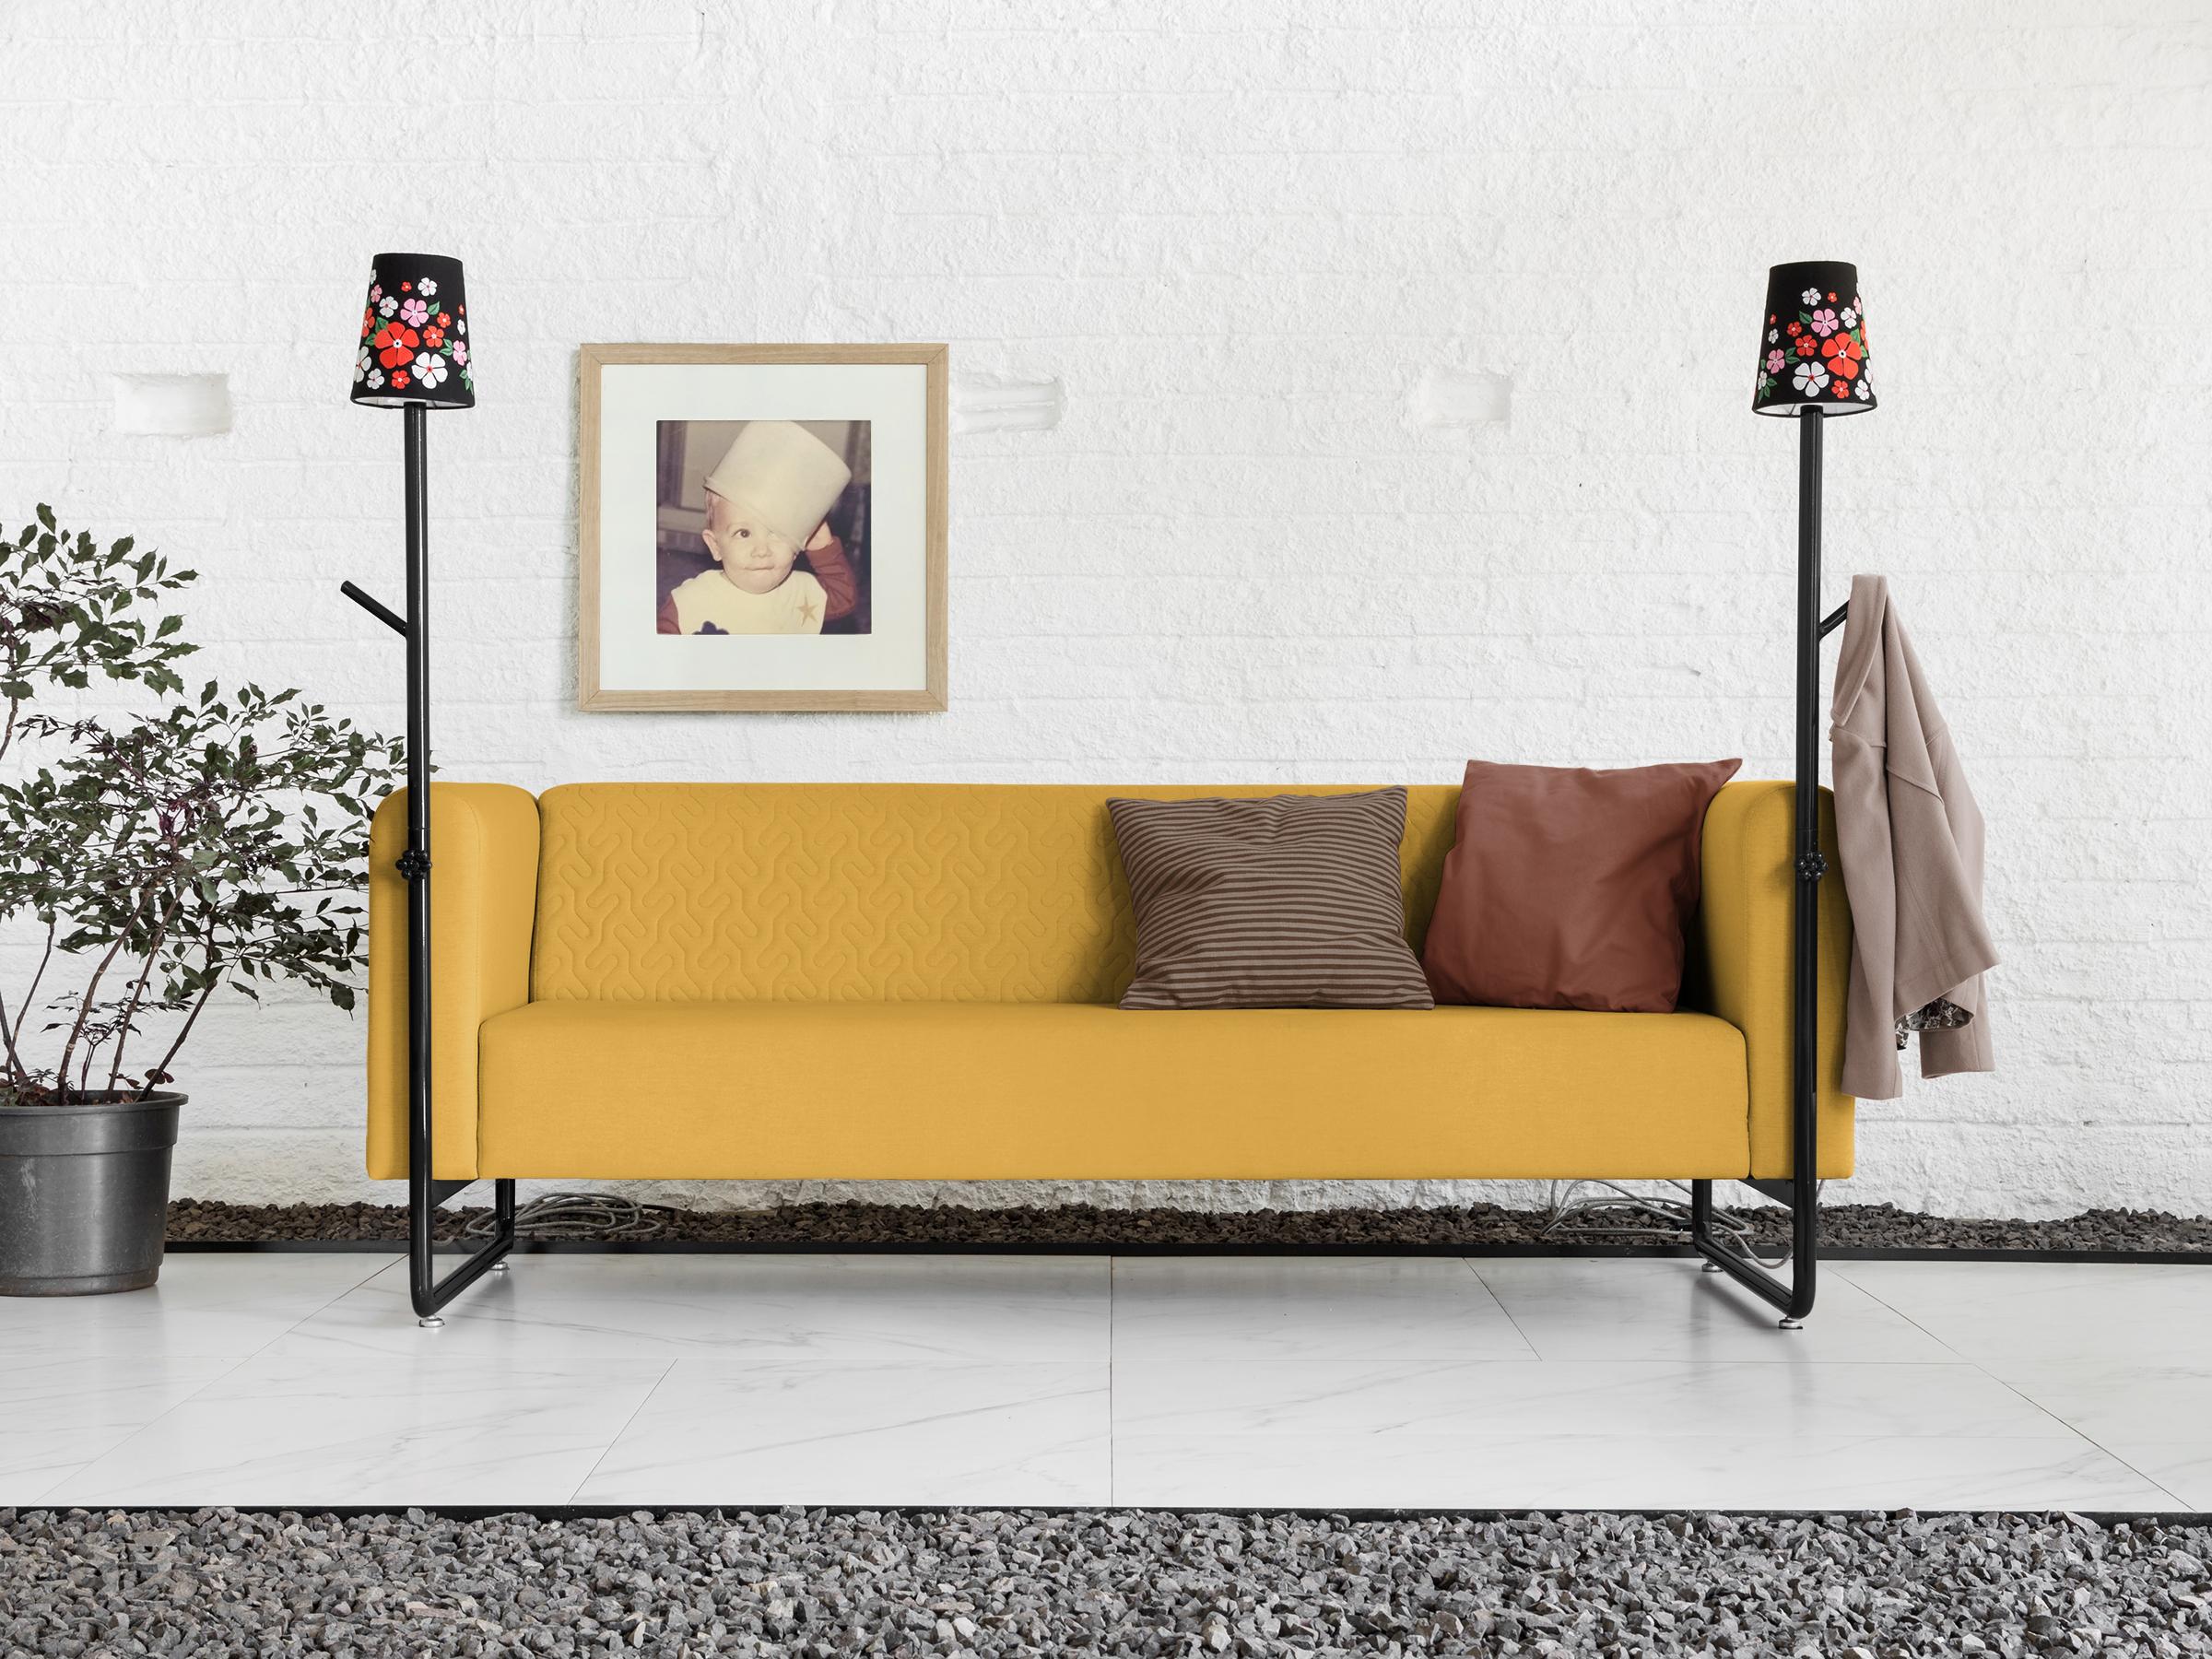 Post-Modern Yellow PK9 Sofa, Seat & Lamp Hybrid, Handmade Metal Structure by Paulo Kobylka For Sale